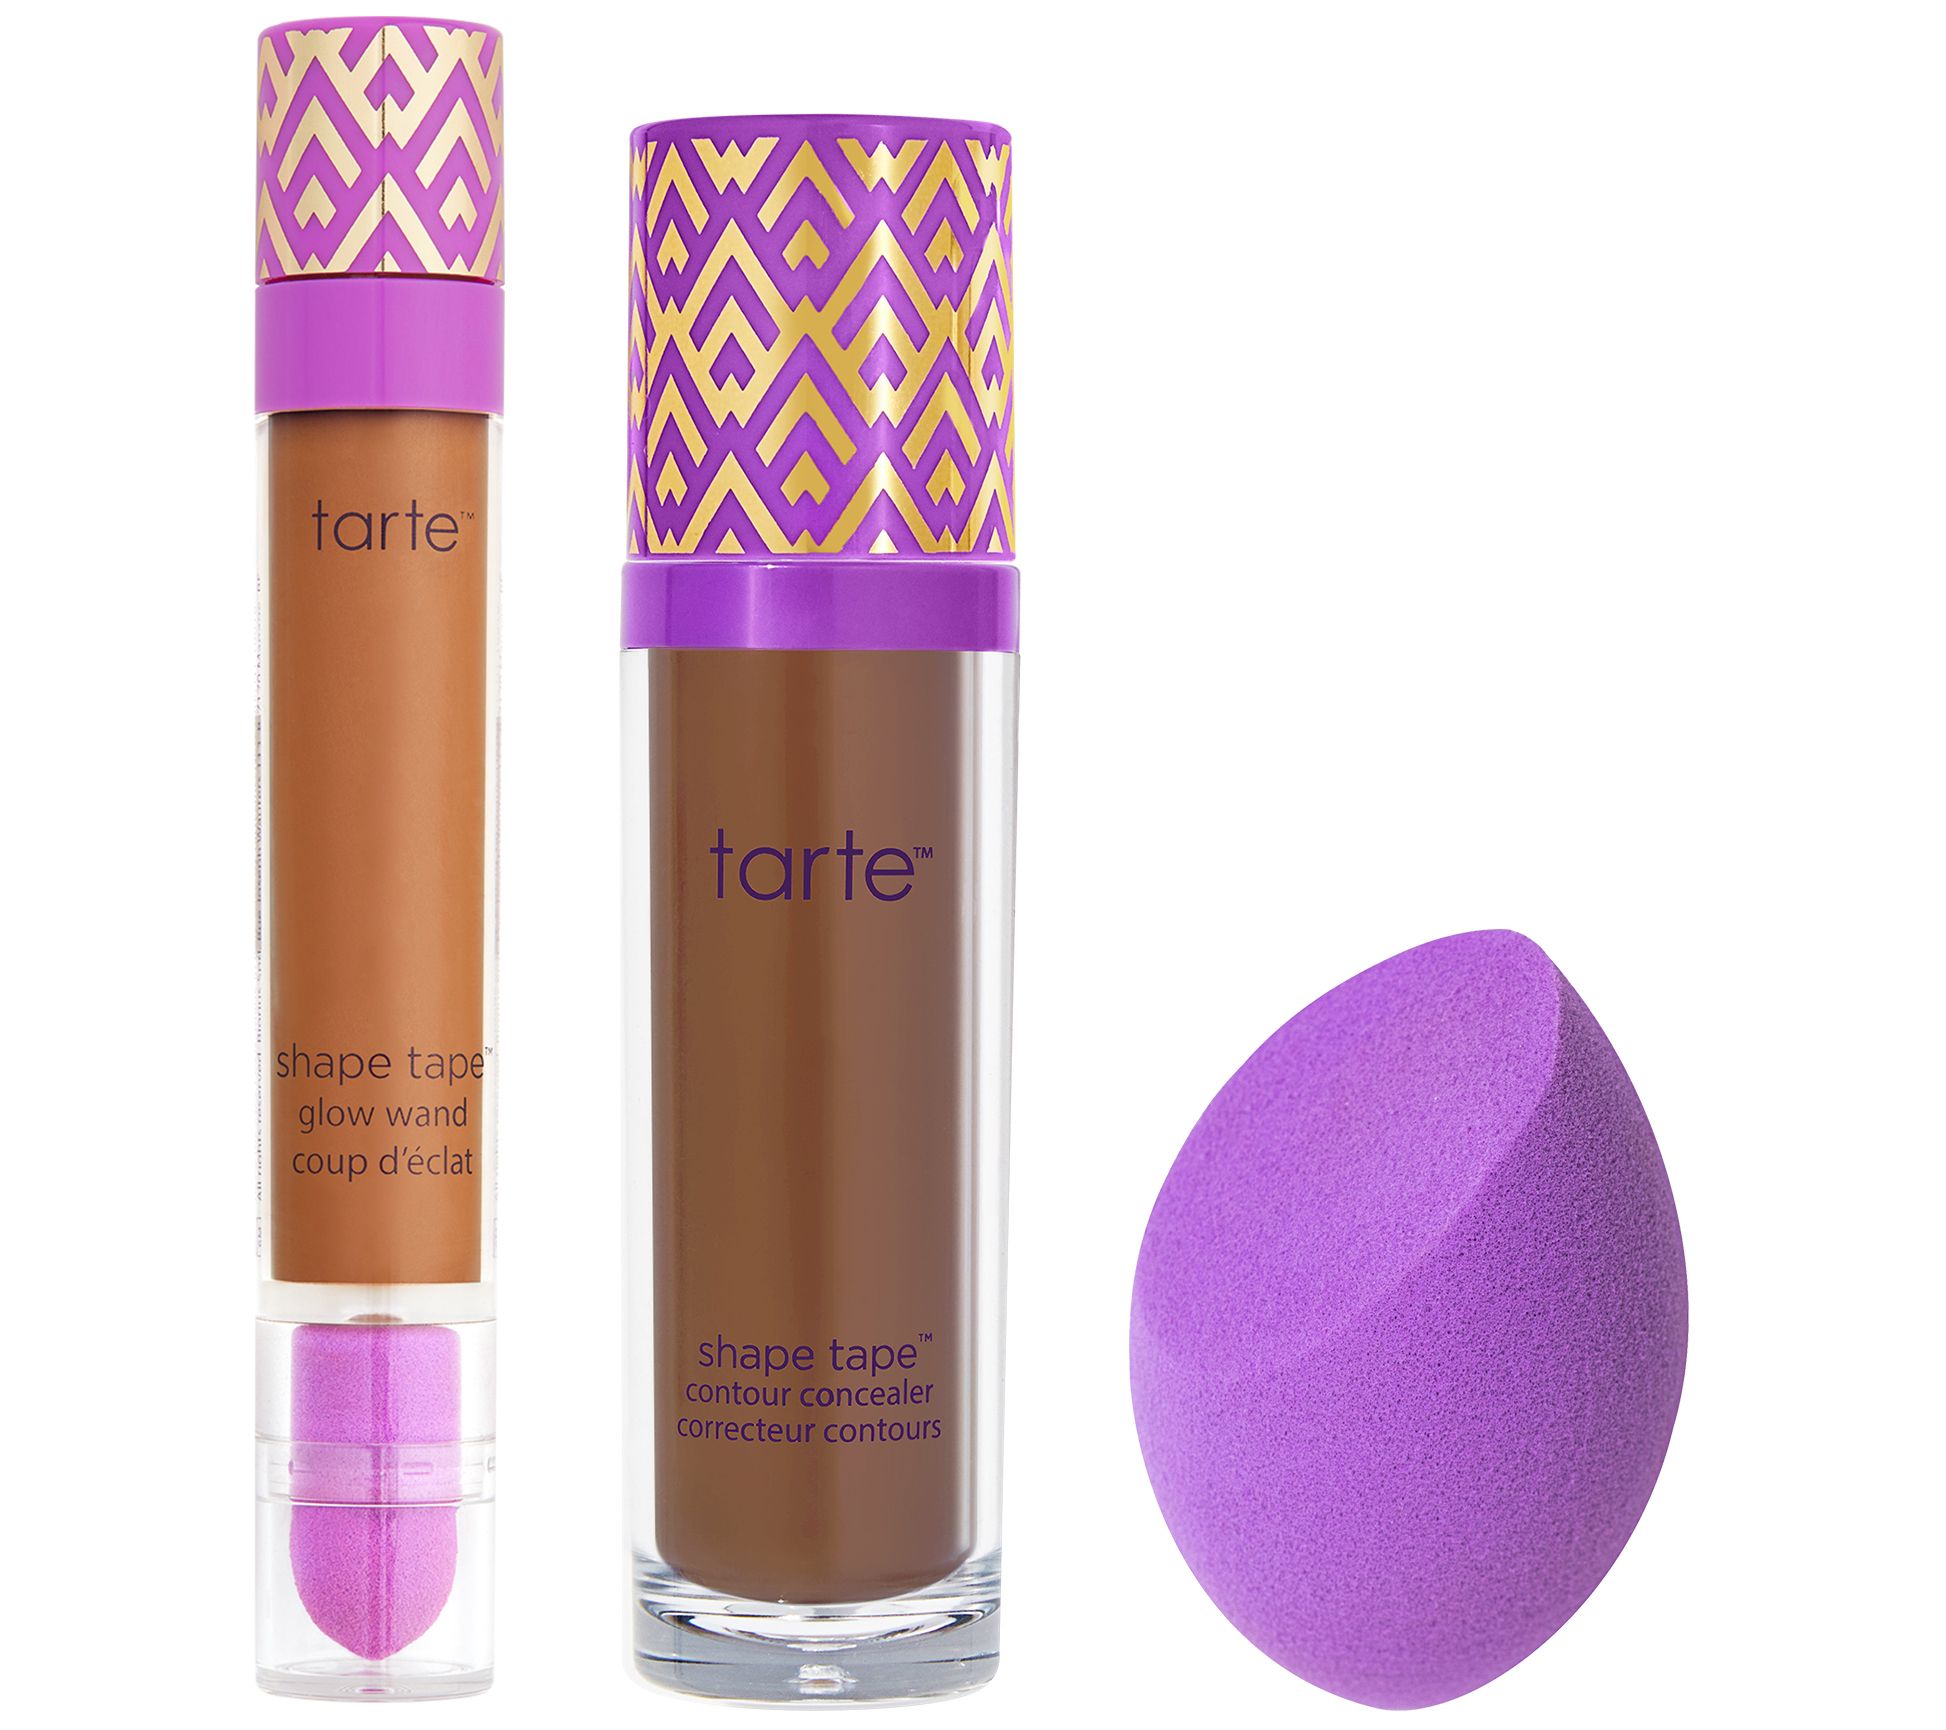 tarte Super-size Shape Tape Light & Lifted 3-pc Collection 